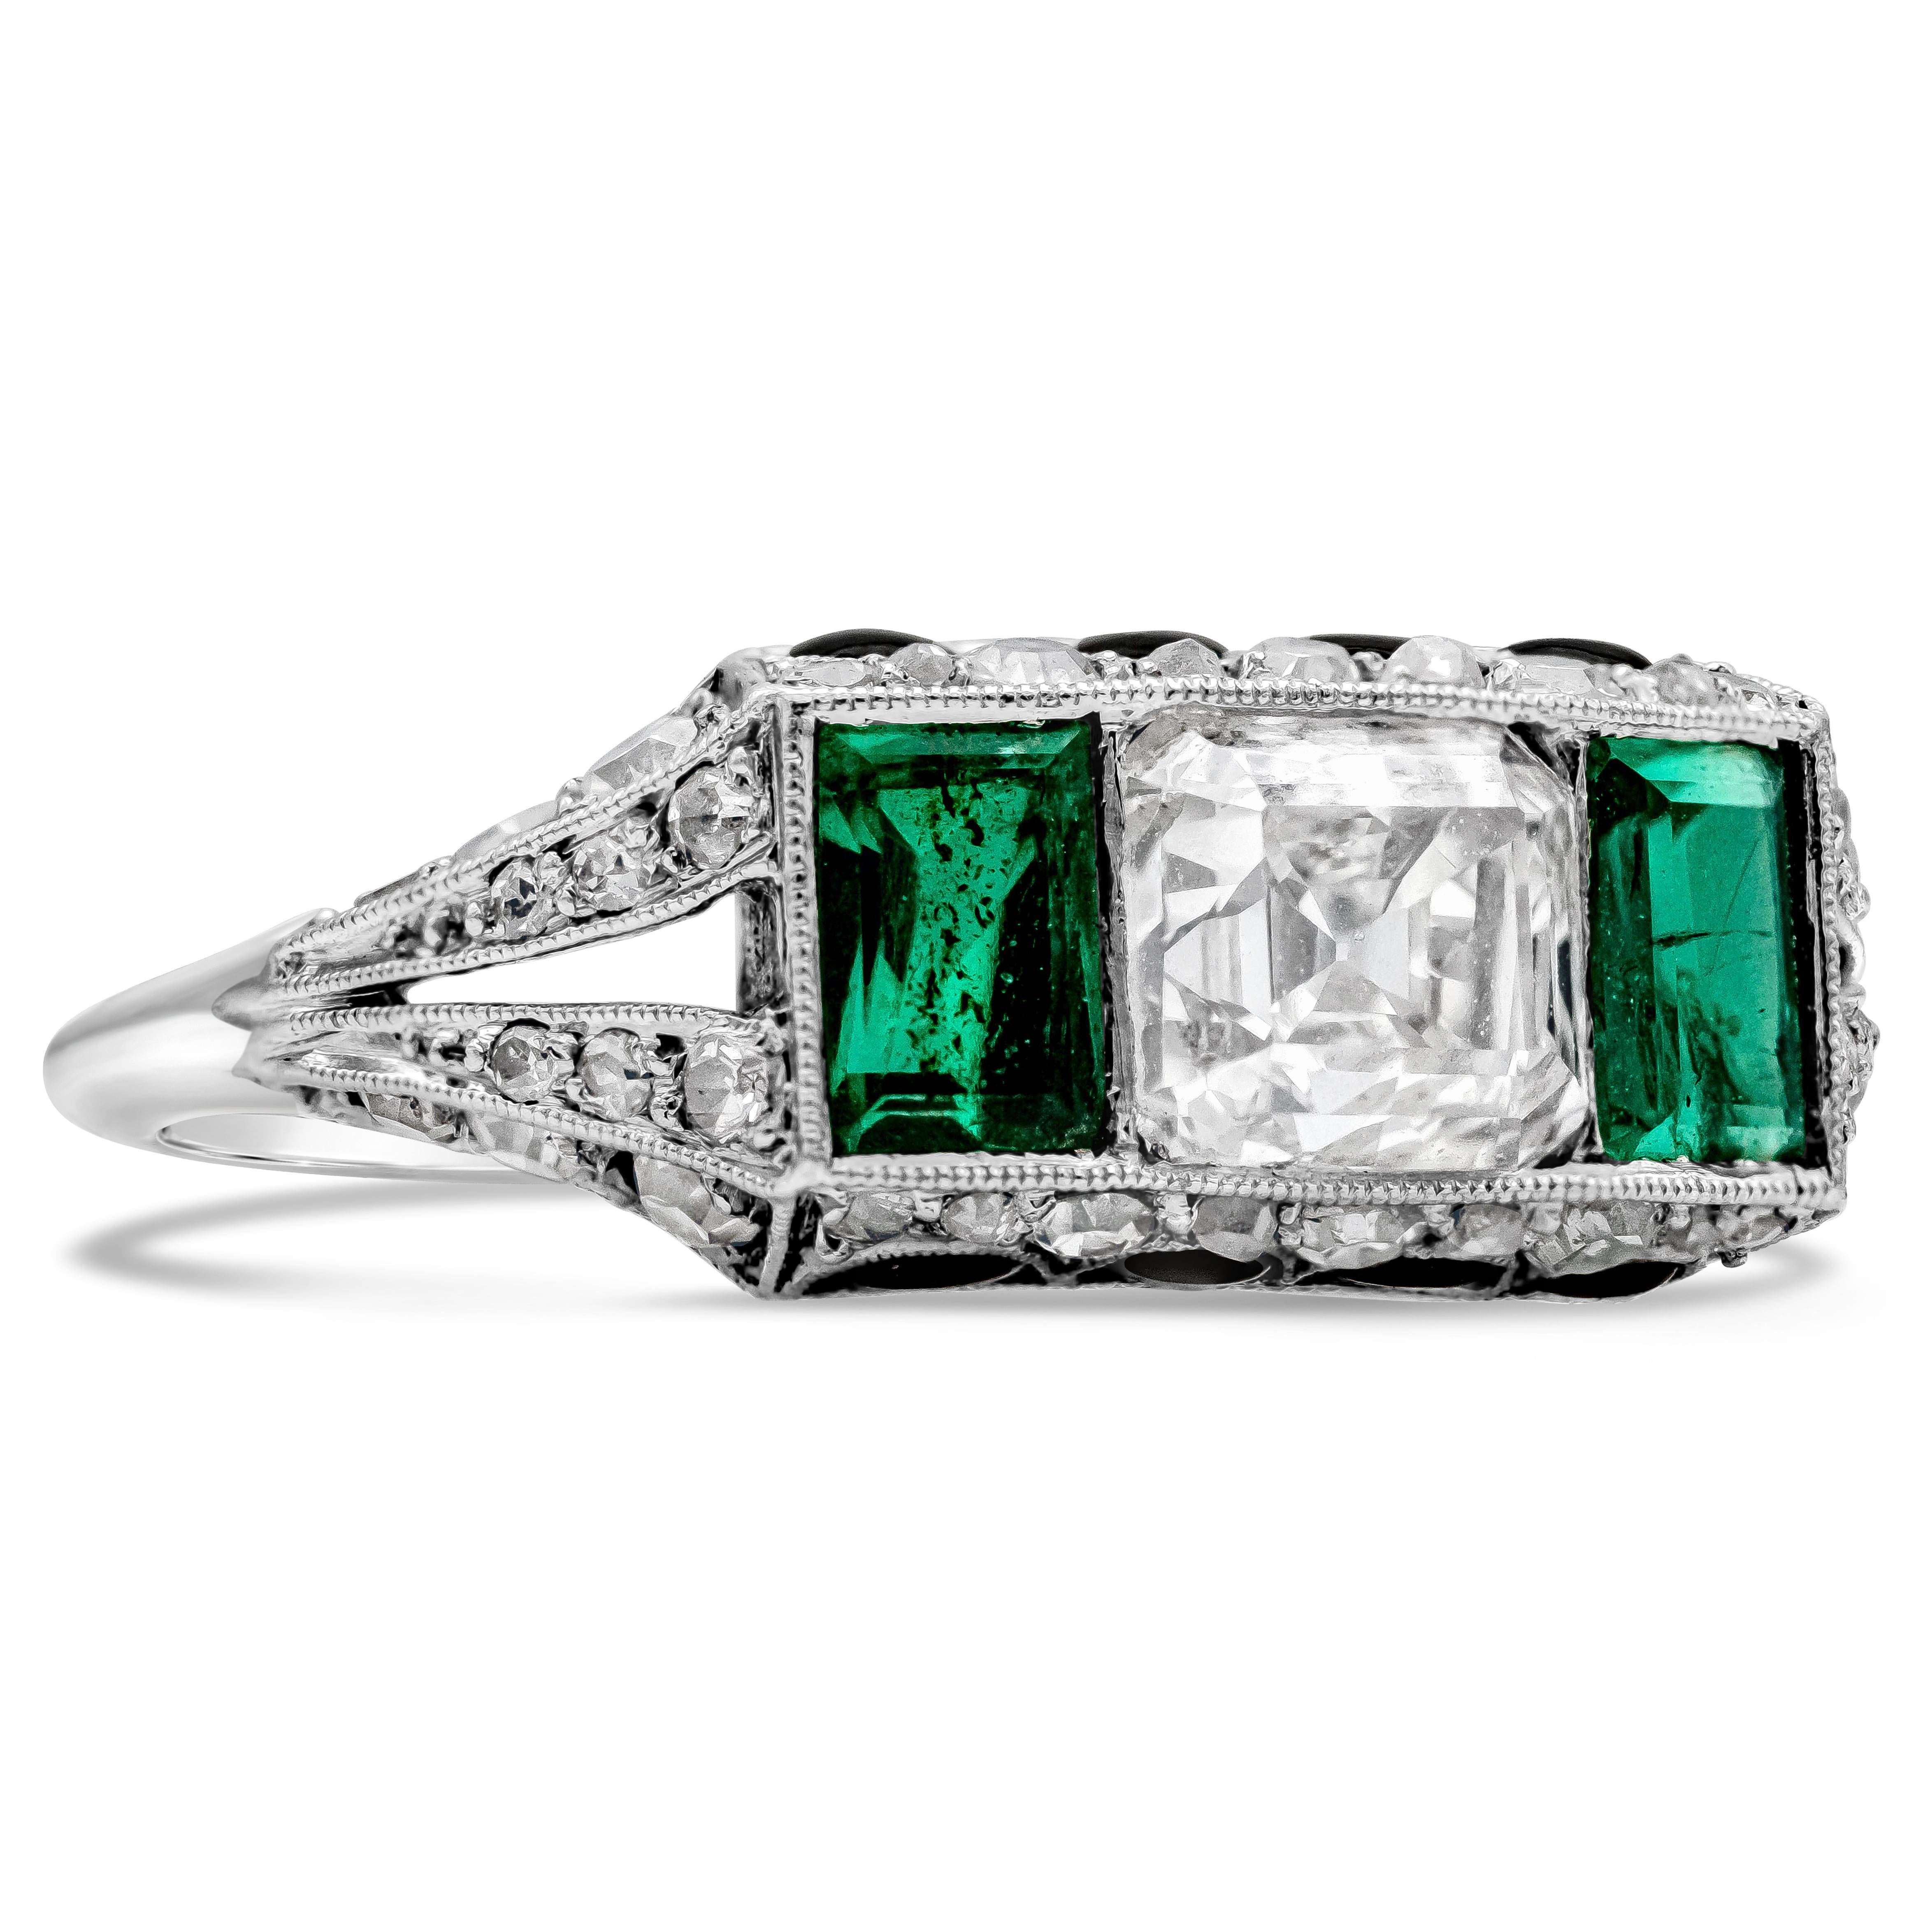 This antique engagement ring features an asscher cut diamond in the center weighing 1.00 carats, flanked by rectangular green emerald on each side weighing 0.70 carats total. Set in a split-shank setting and accented by 4 half-moon cut onyx on the